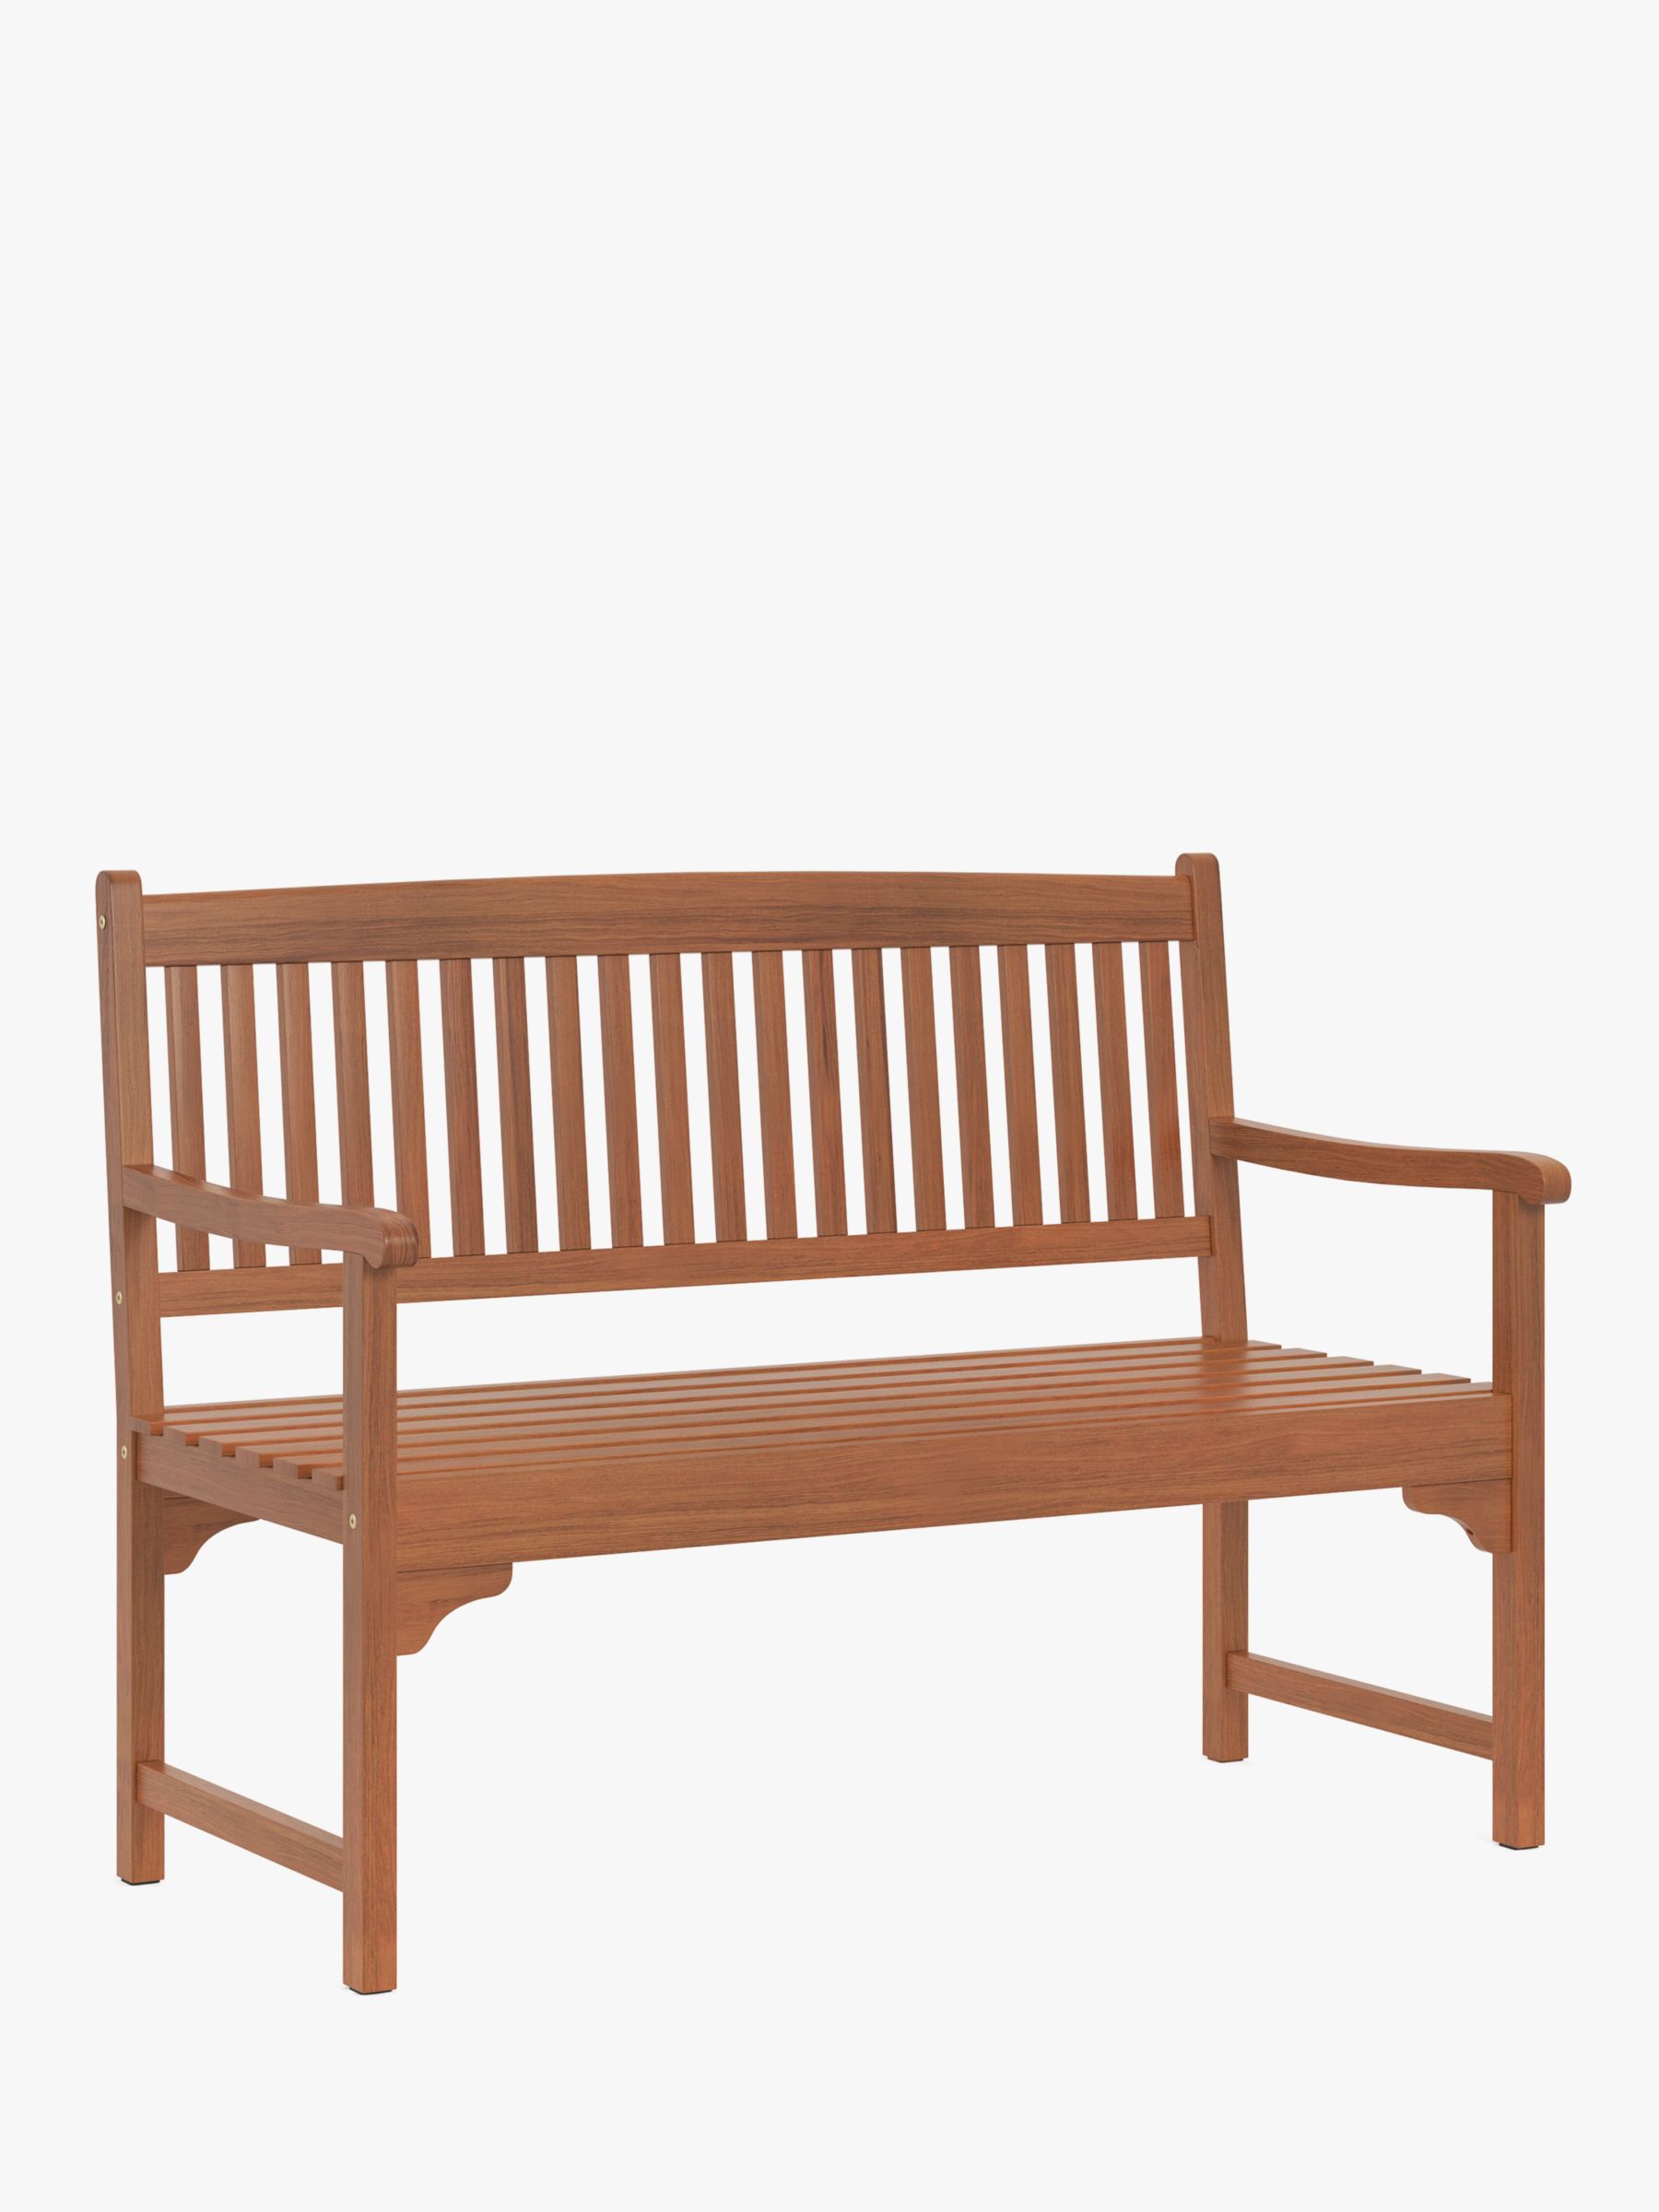 Photo of John lewis anyday 2-seater garden bench fsc-certified -eucalyptus wood- natural